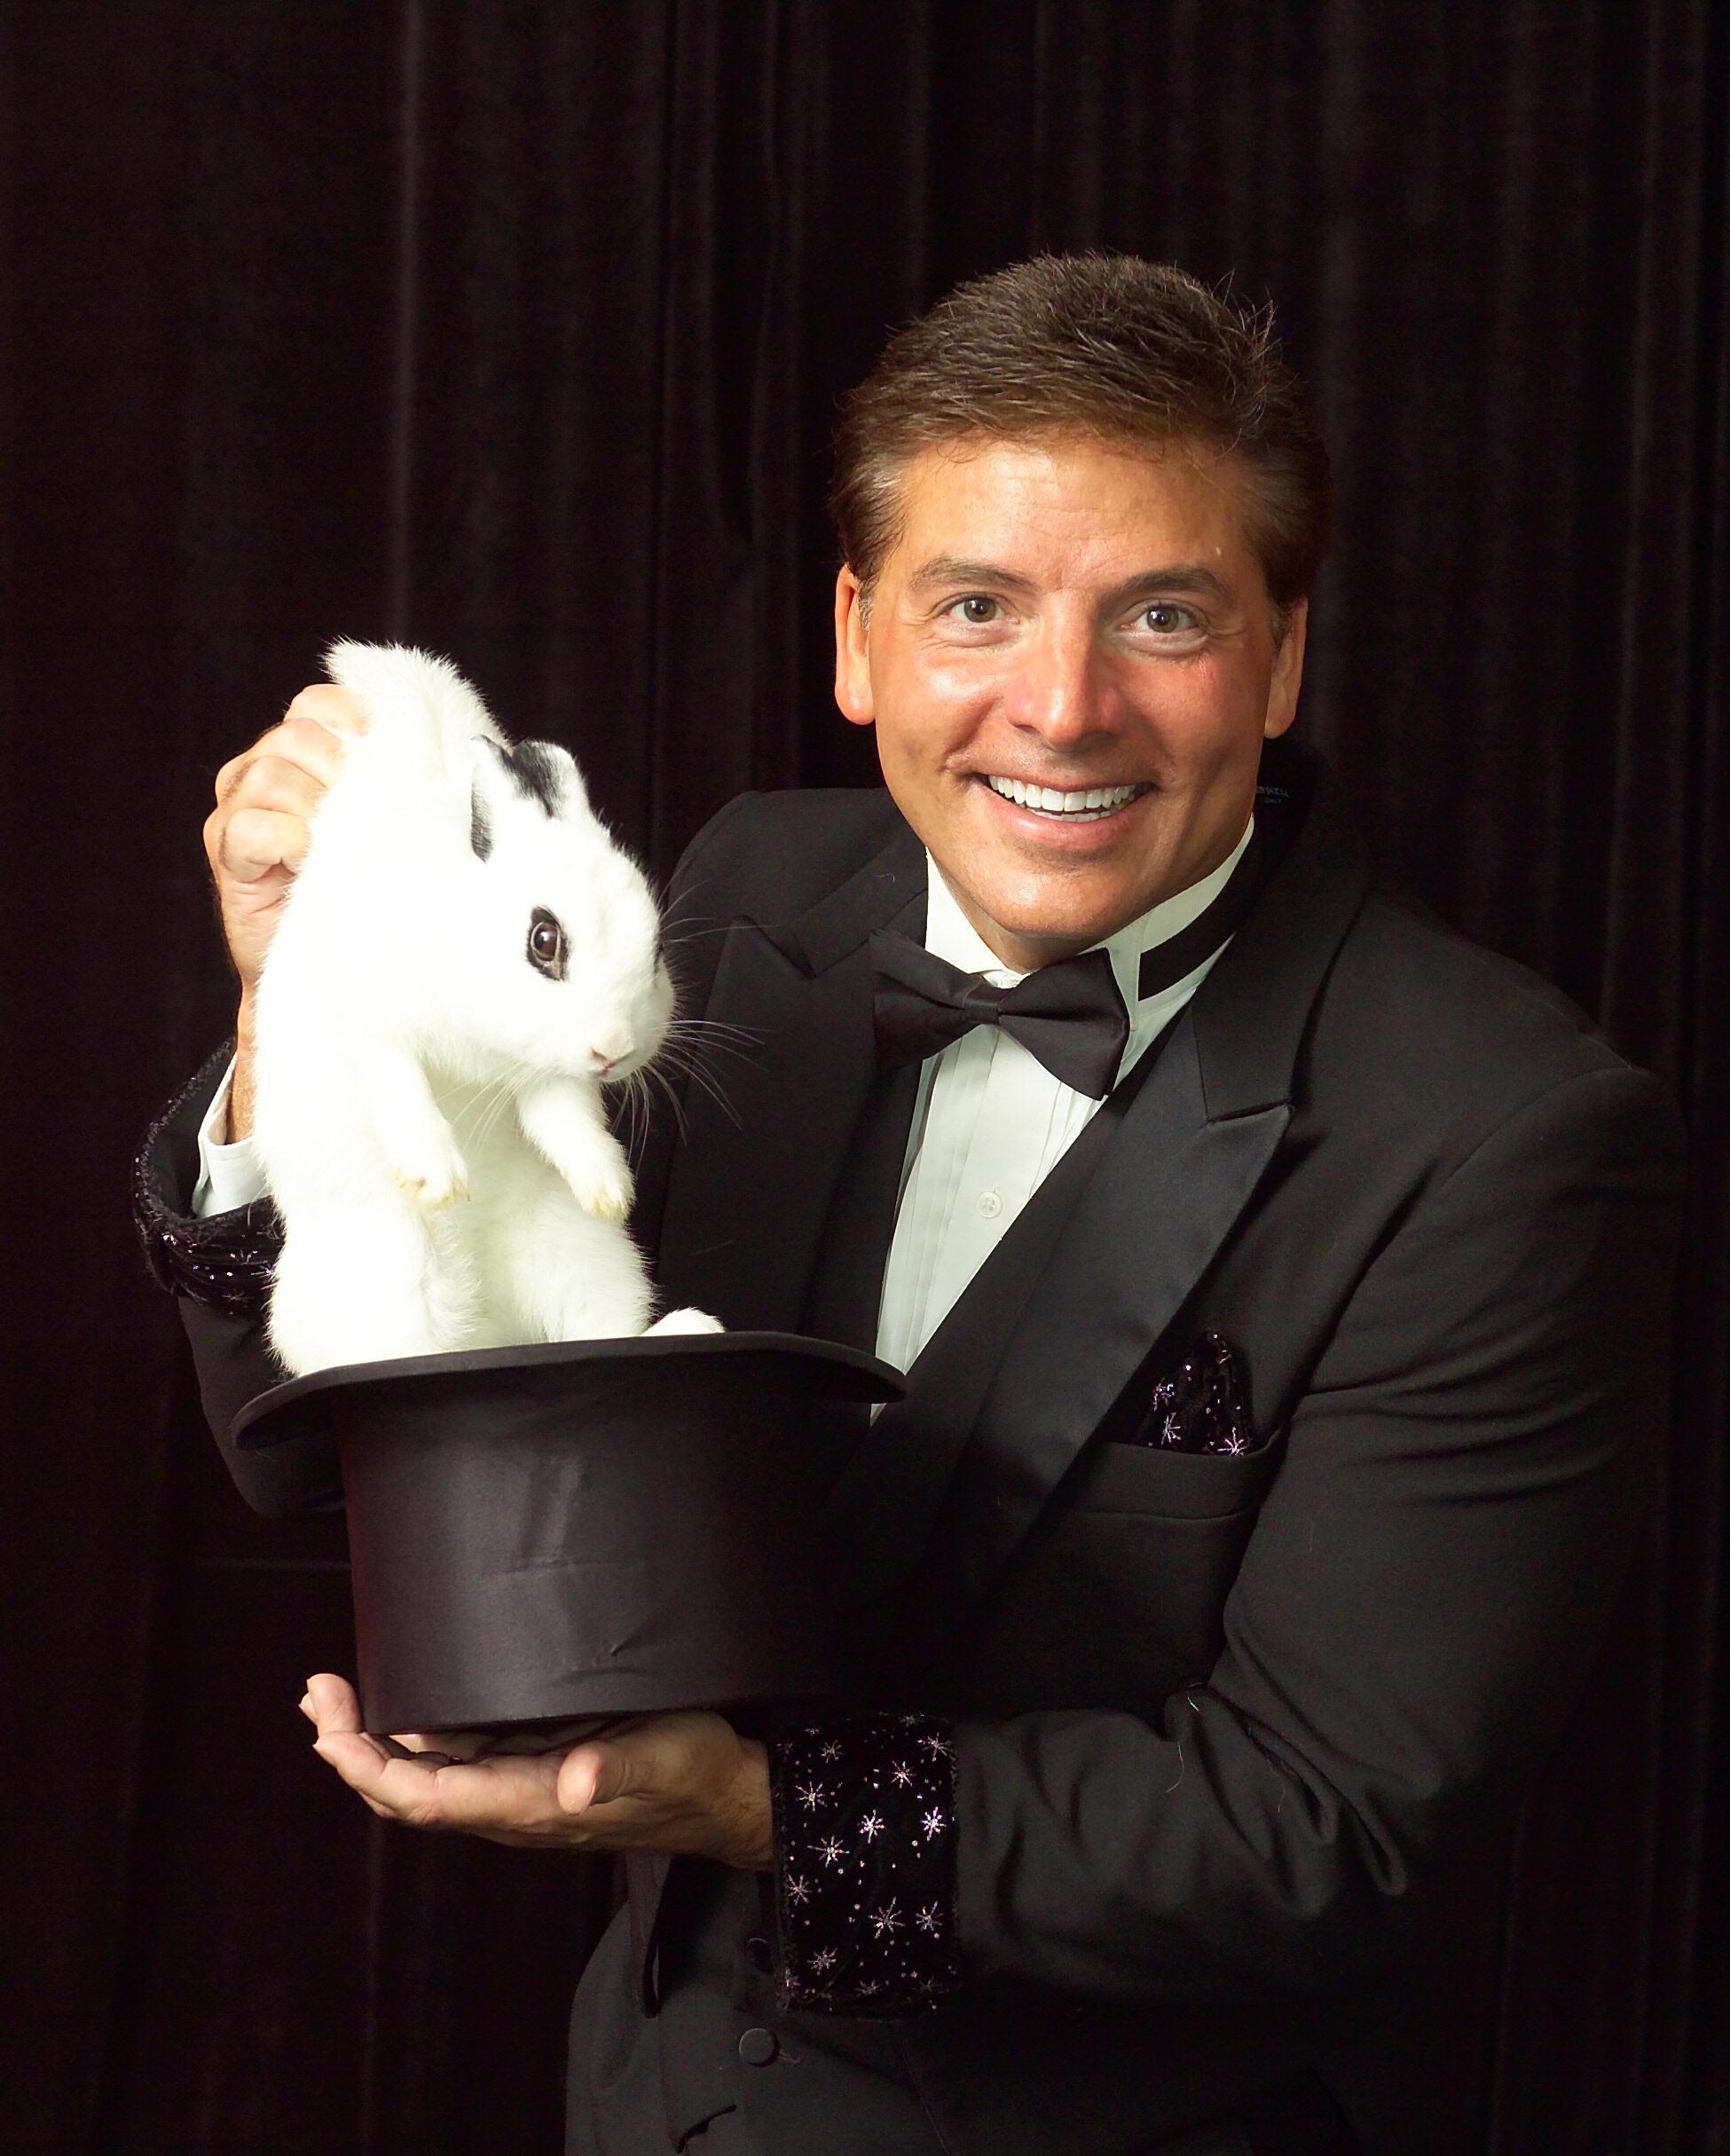 kids party magician rental los angeles childrens birthday parties orange county magic show childs entertainment